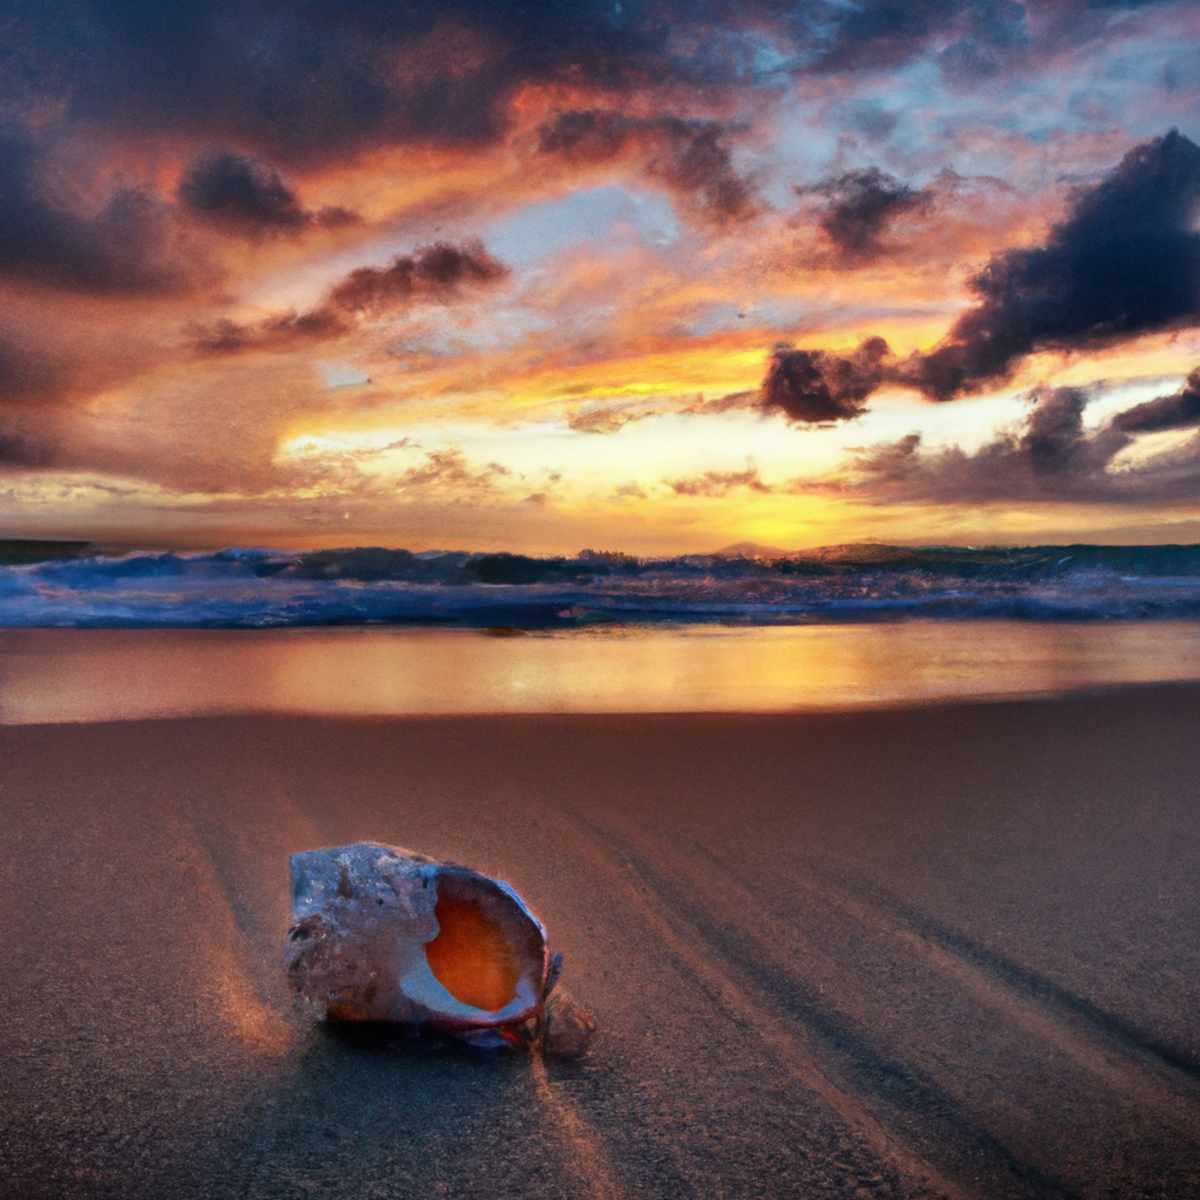 Solitary seashell on warm sand, illuminated by setting sun, symbolizes emotional recovery amidst life's challenges - Takotsubo Cardiomyopathy (Broken Heart Syndrome) 